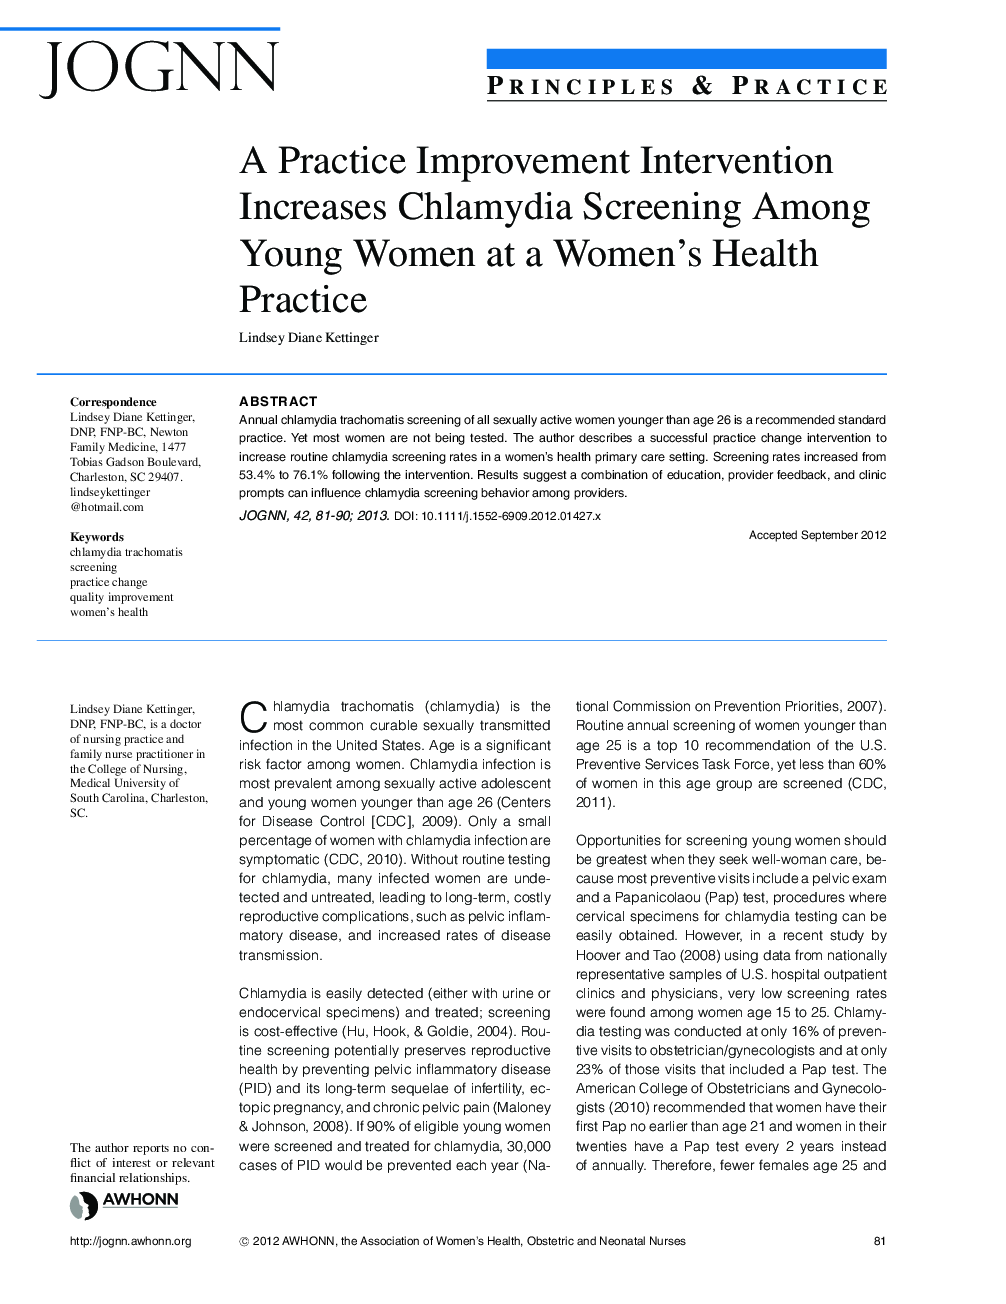 A Practice Improvement Intervention Increases Chlamydia Screening Among Young Women at a Women's Health Practice